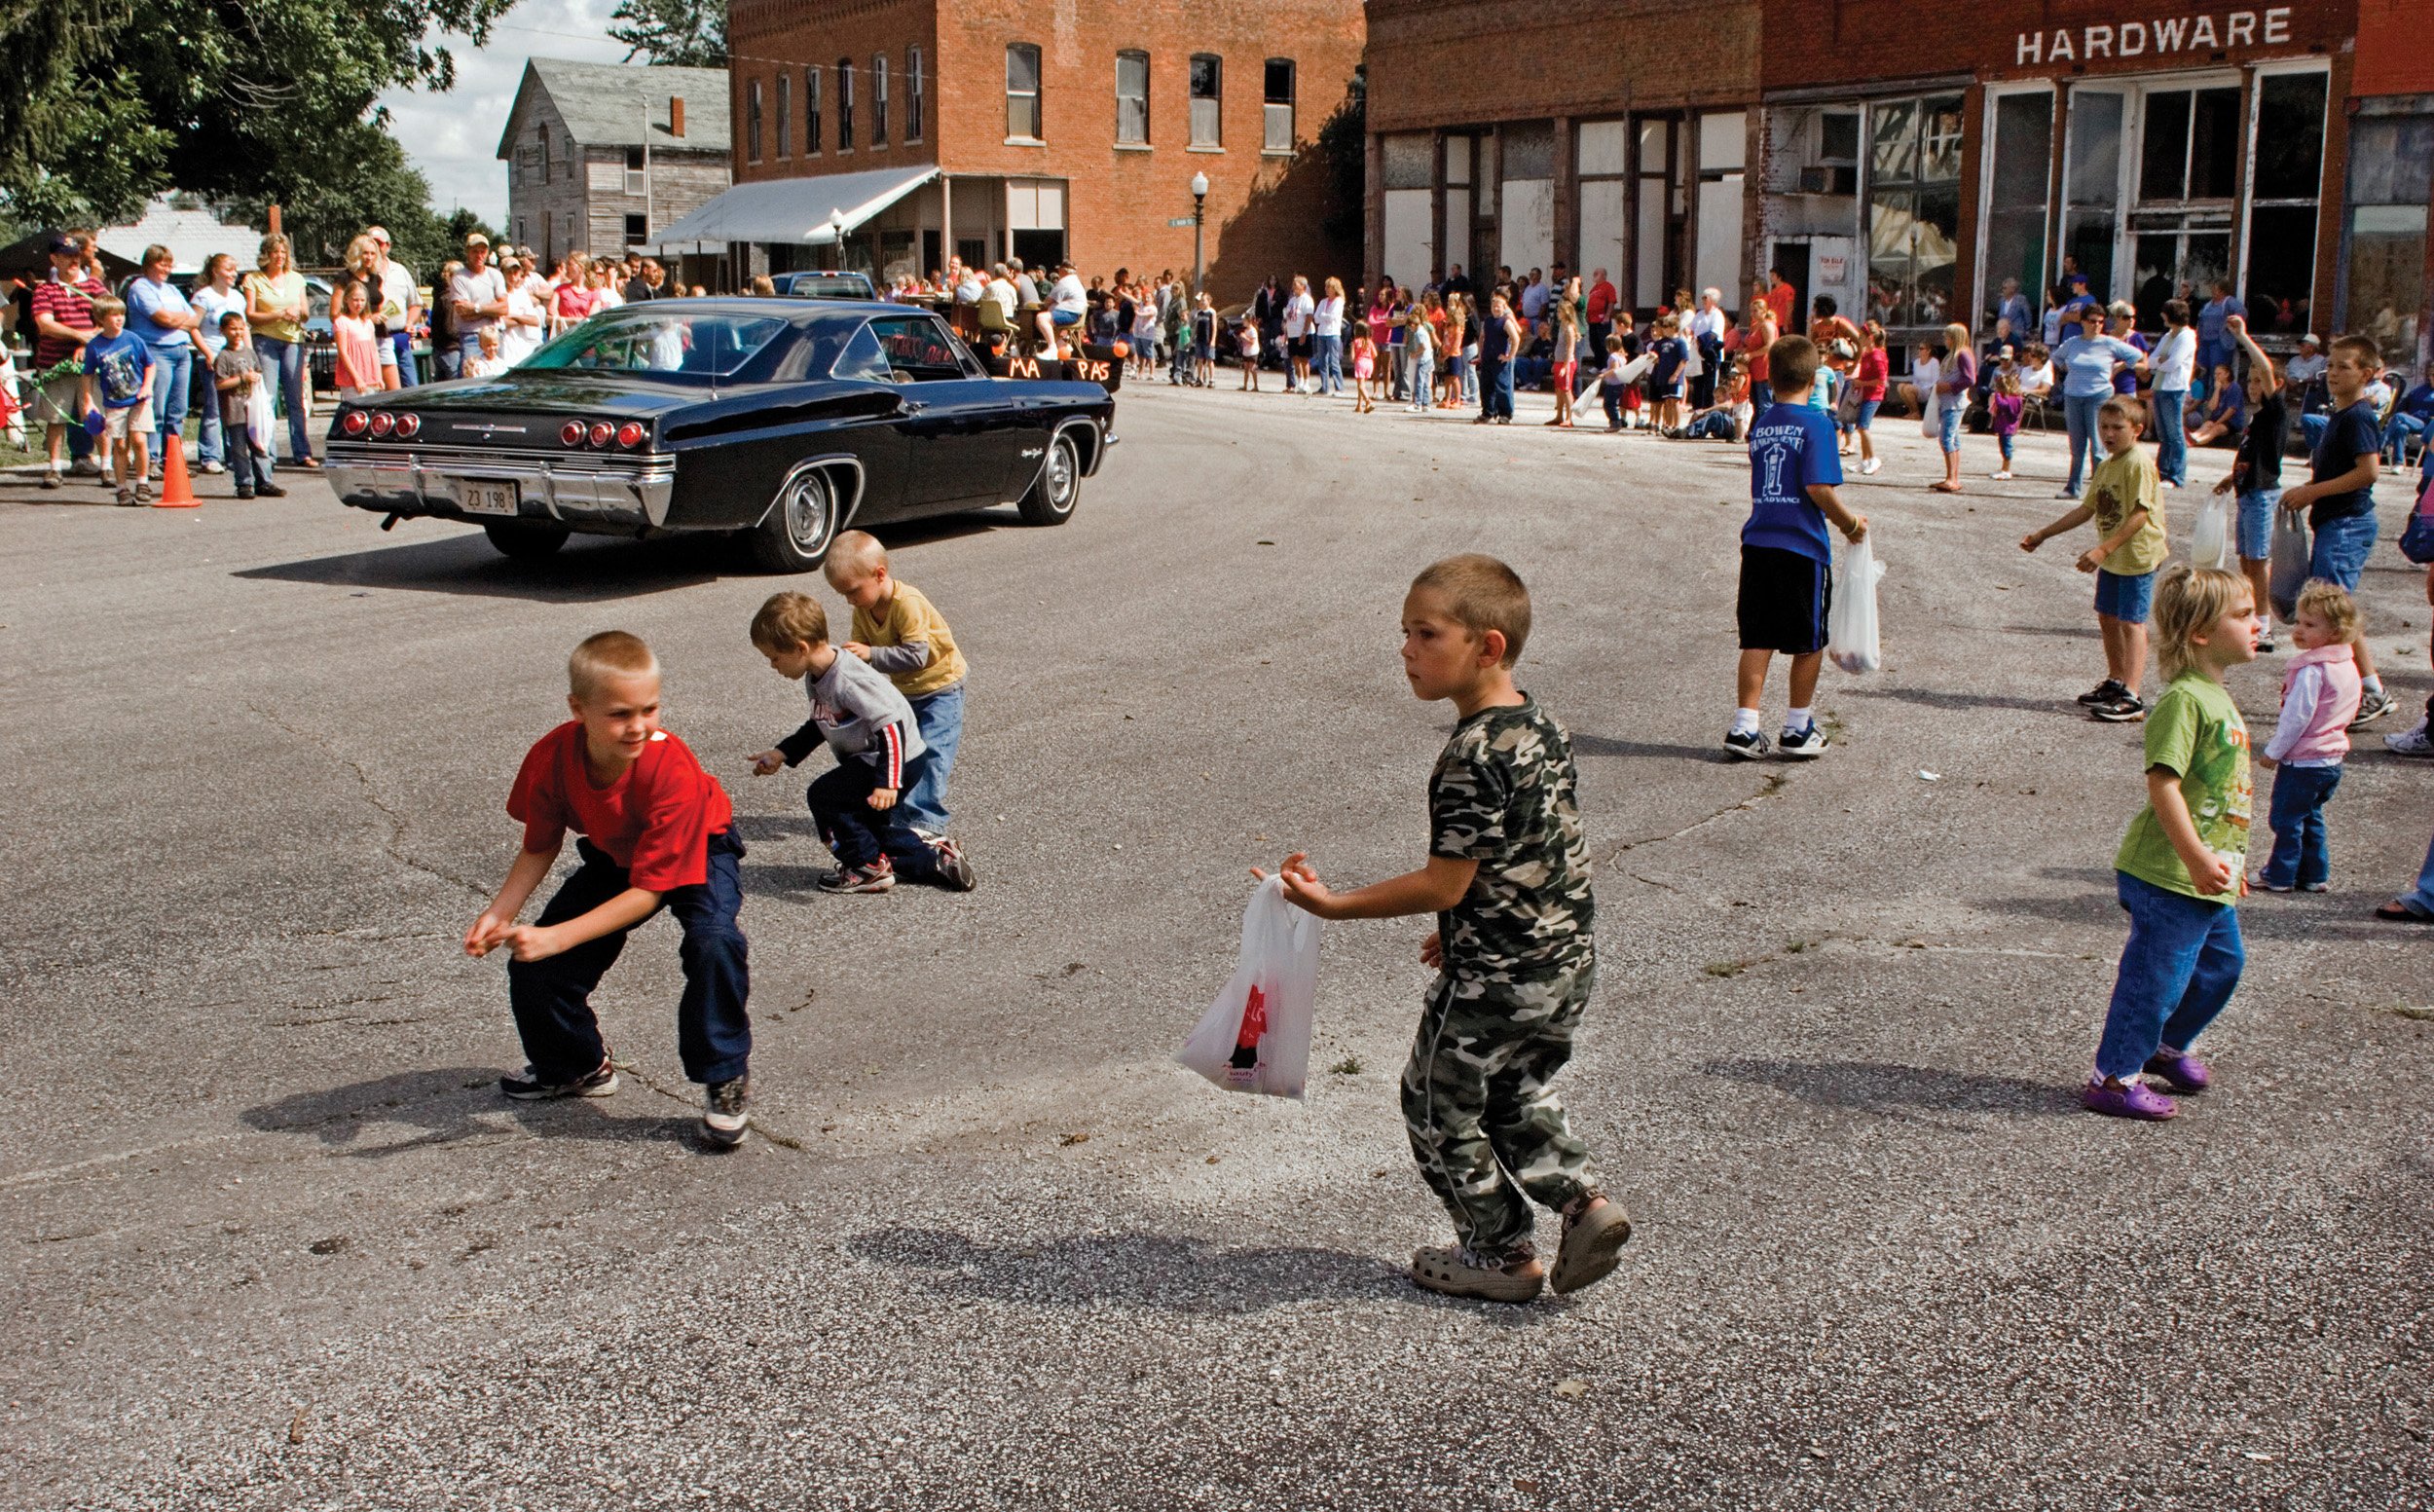  Plymouth Old Settlers festival parade. Kids are picking up candy during the parade. Plymouth, IL. August, 2009 